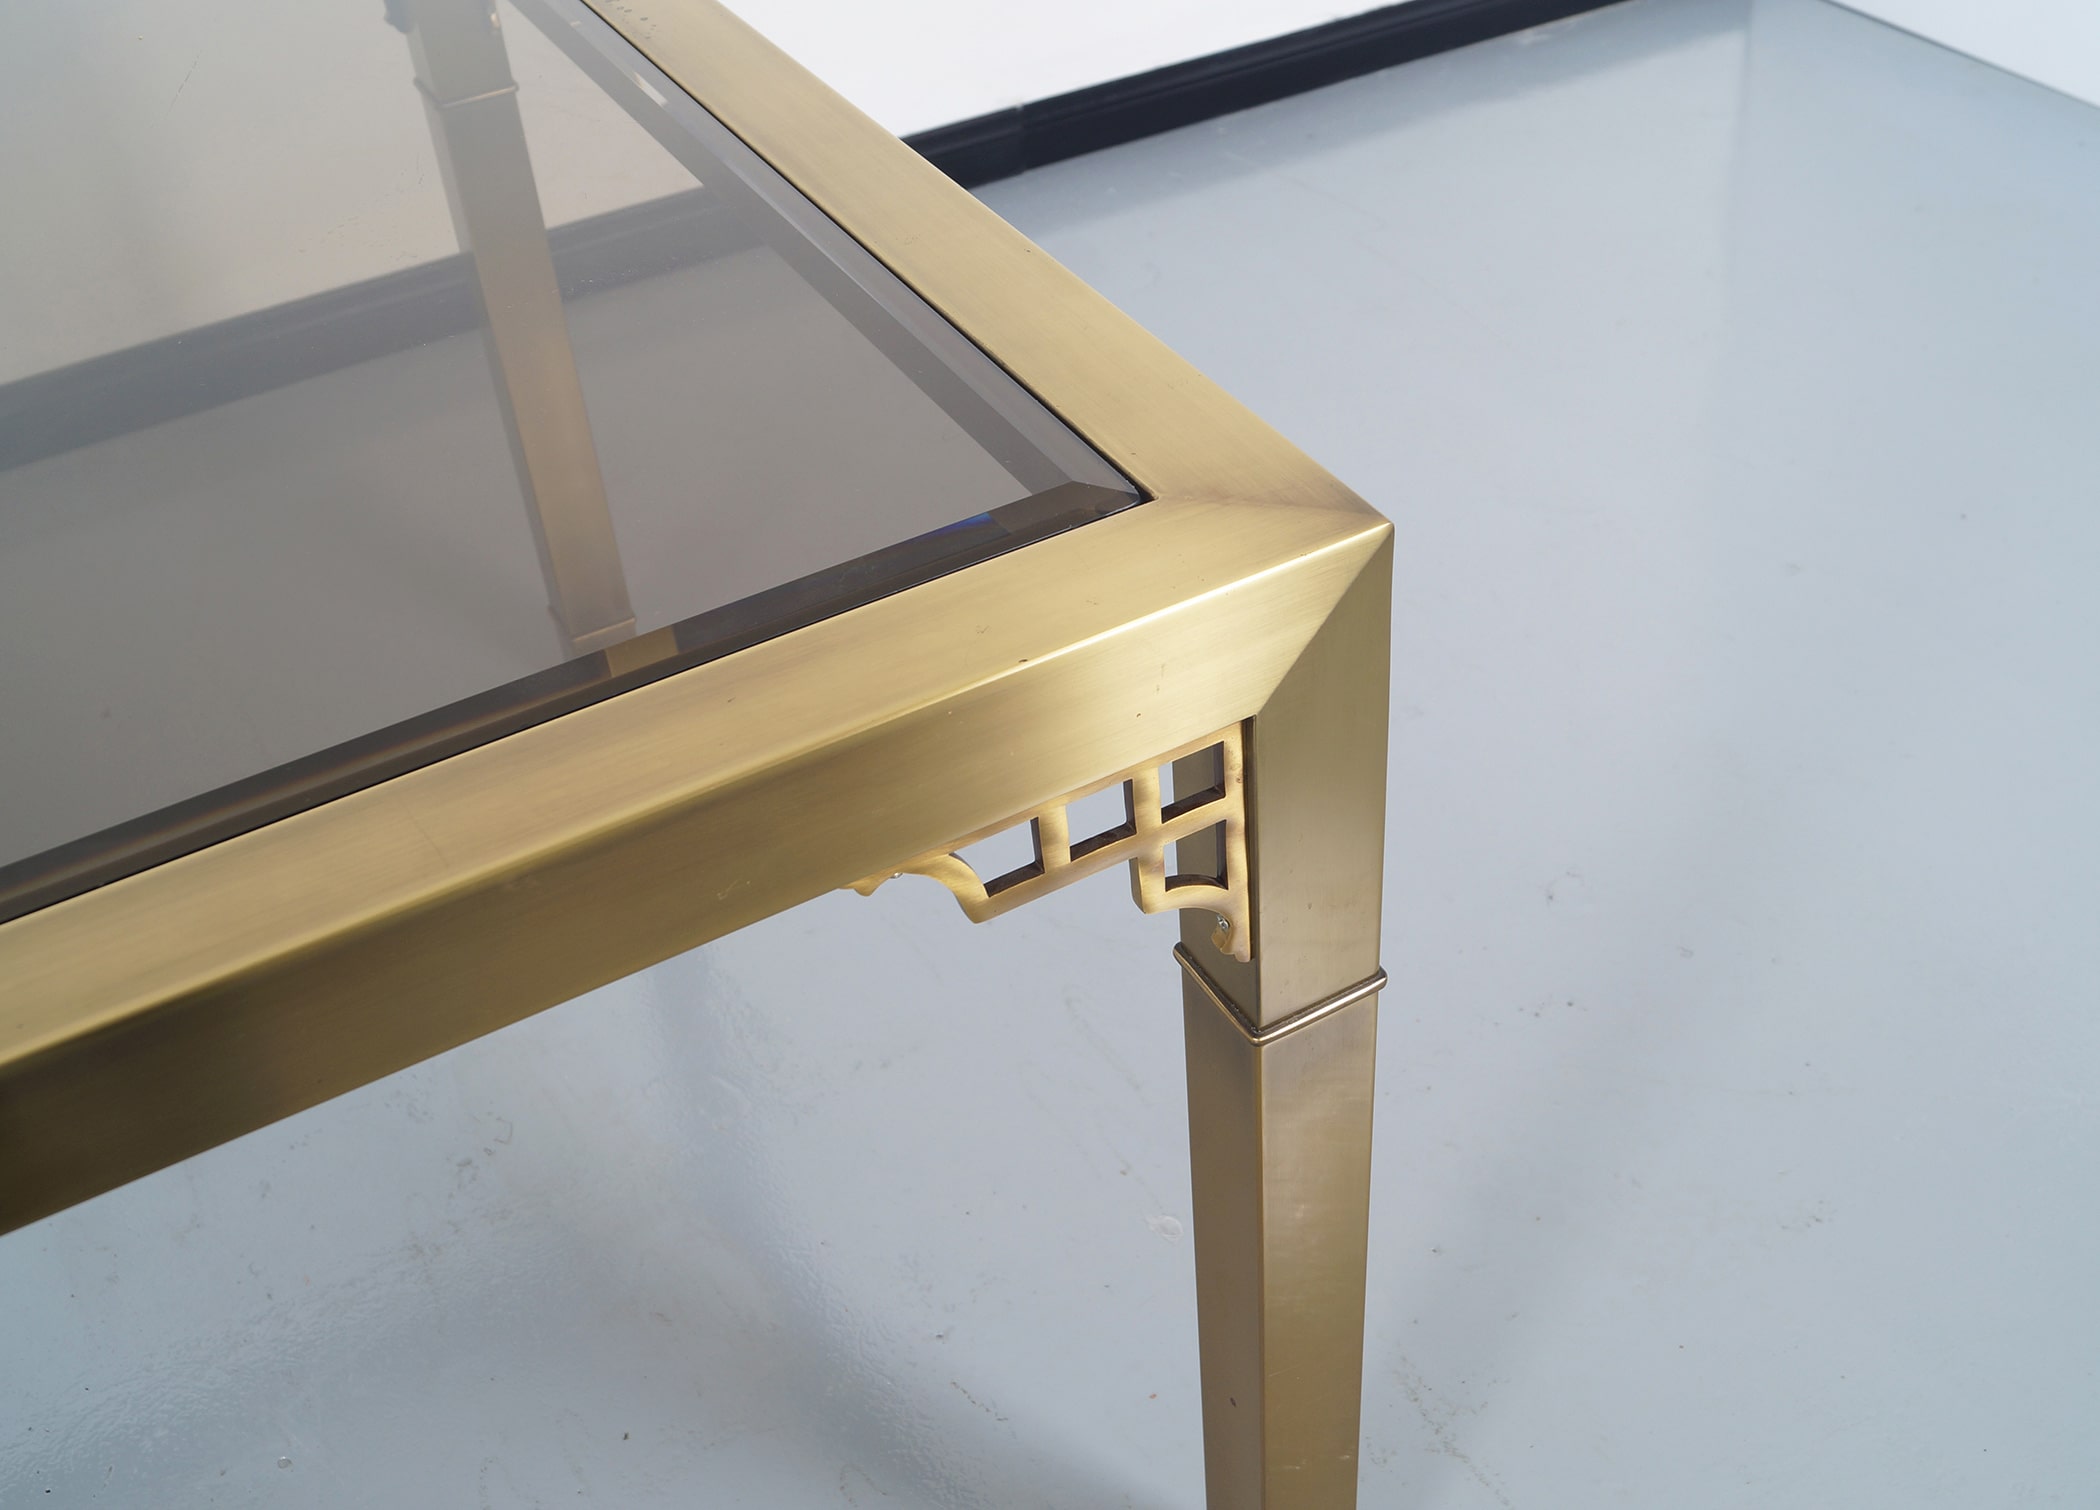 Vintage Brass Dining Table by Mastercraft